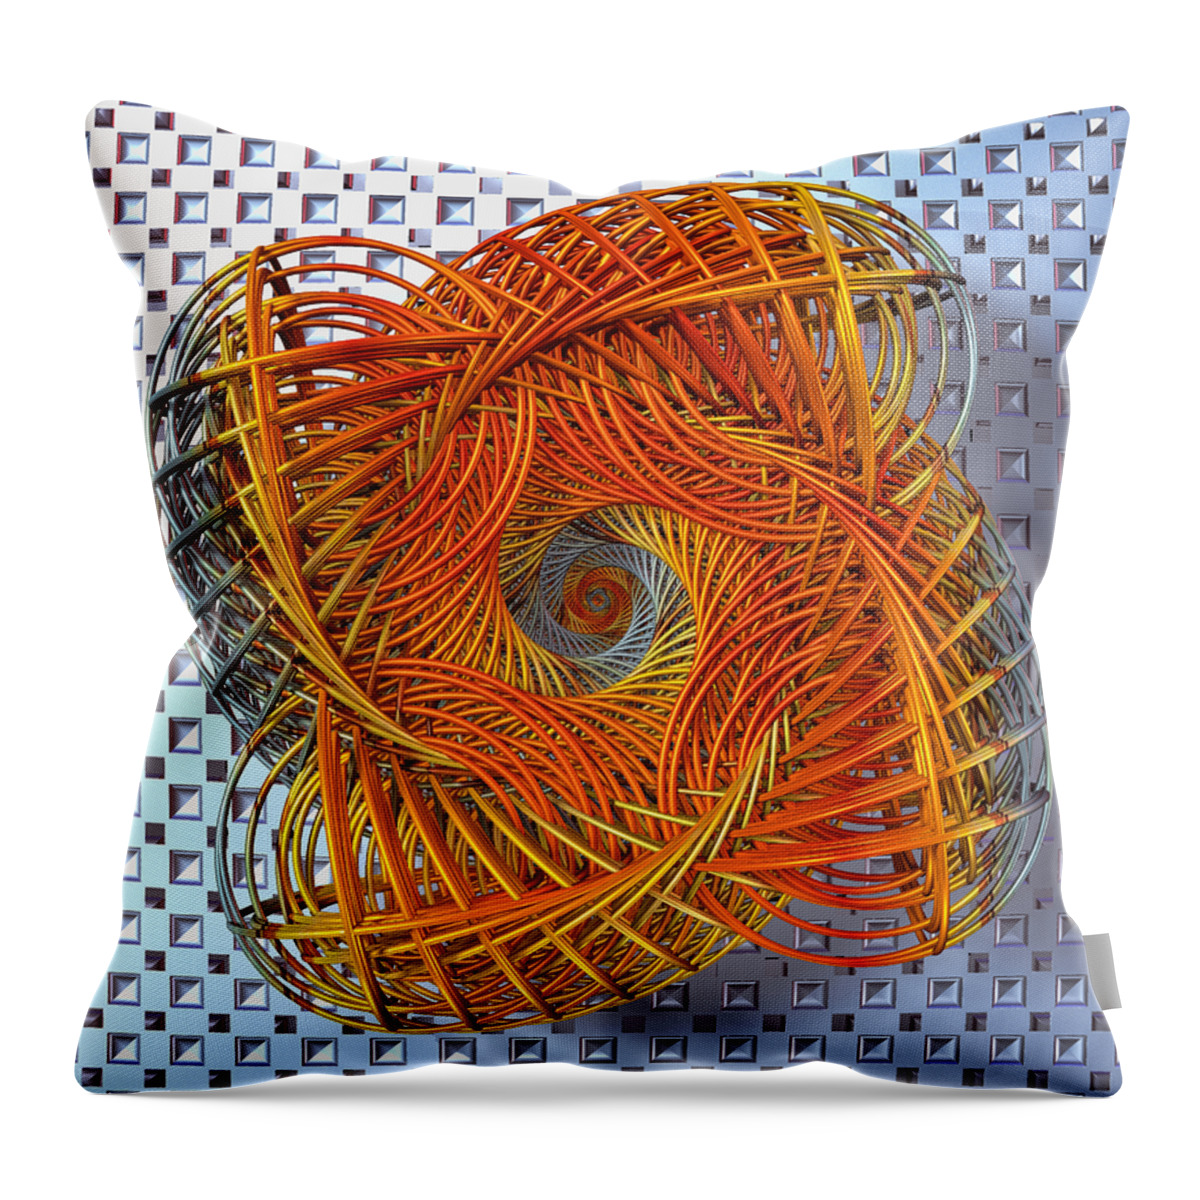 Abstract Throw Pillow featuring the digital art Spin State III by Manny Lorenzo